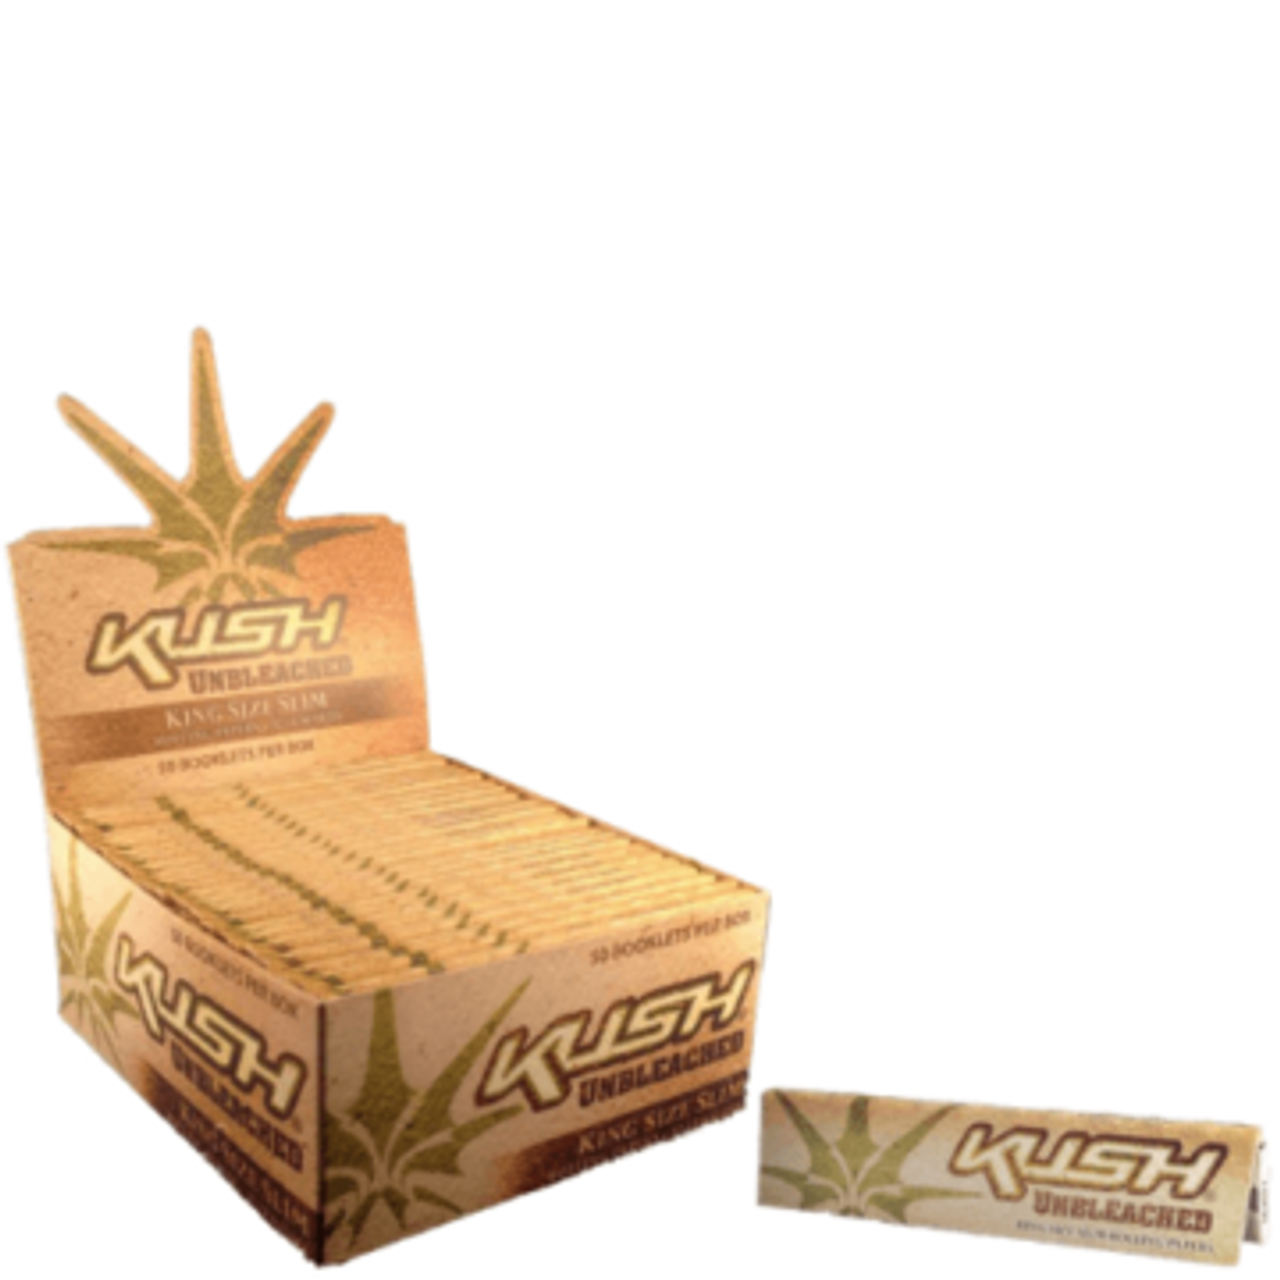 KUSH UNBLEACHED KING SIZE SLIM Rolling Papers 50 Leaflets 50 Booklets Per Box